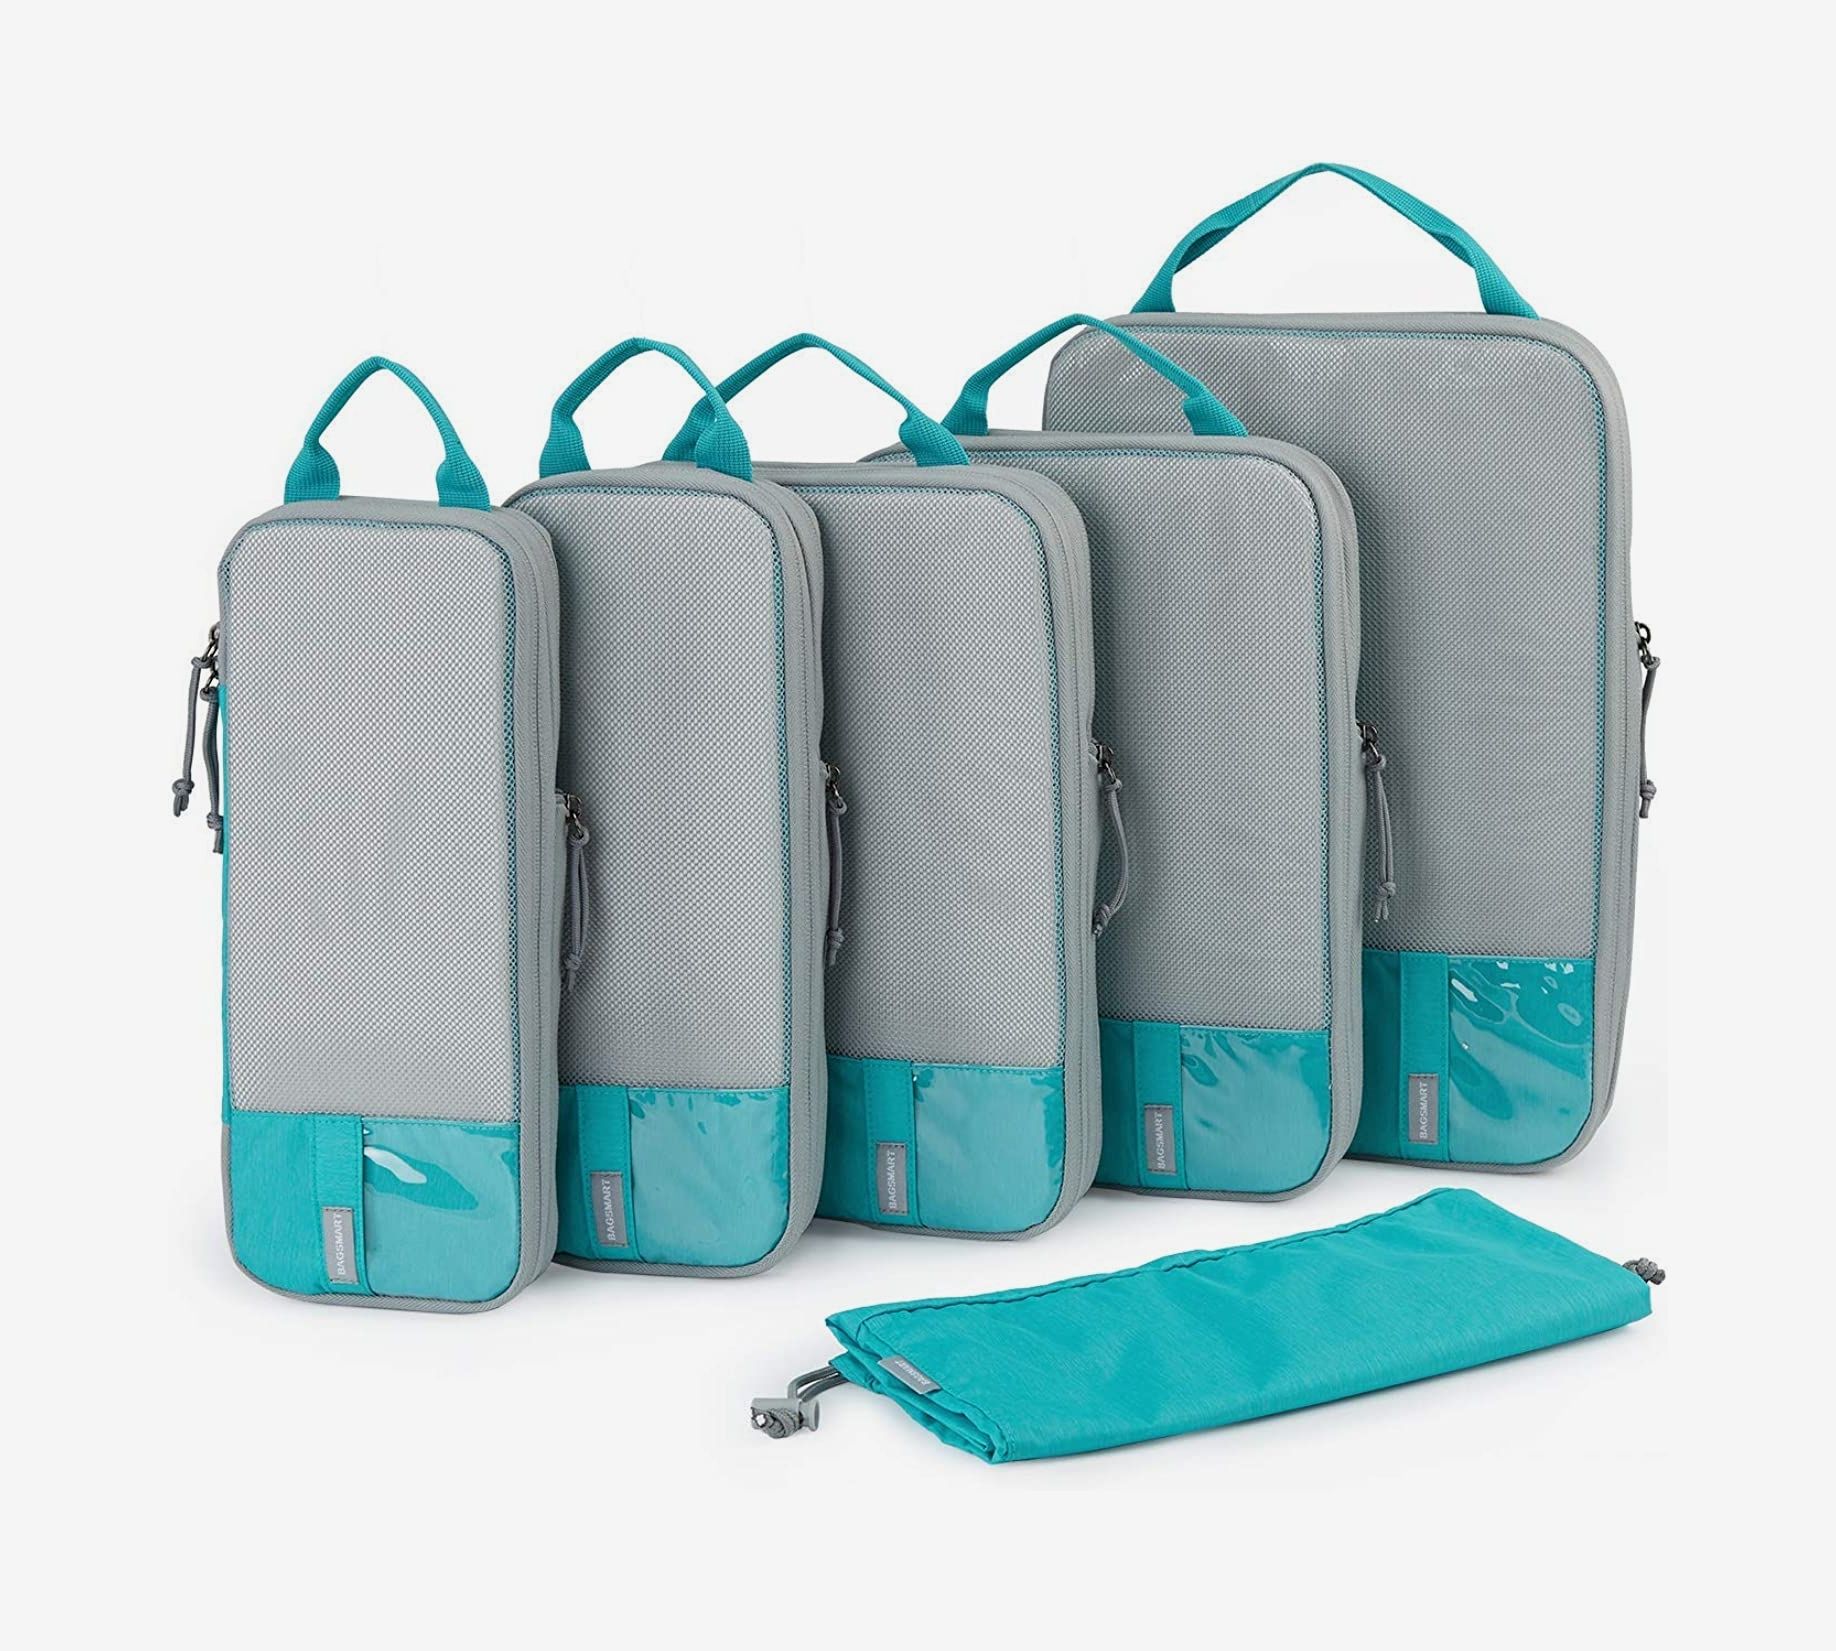 Tripped Travel Compression Packing Cubes Product Review